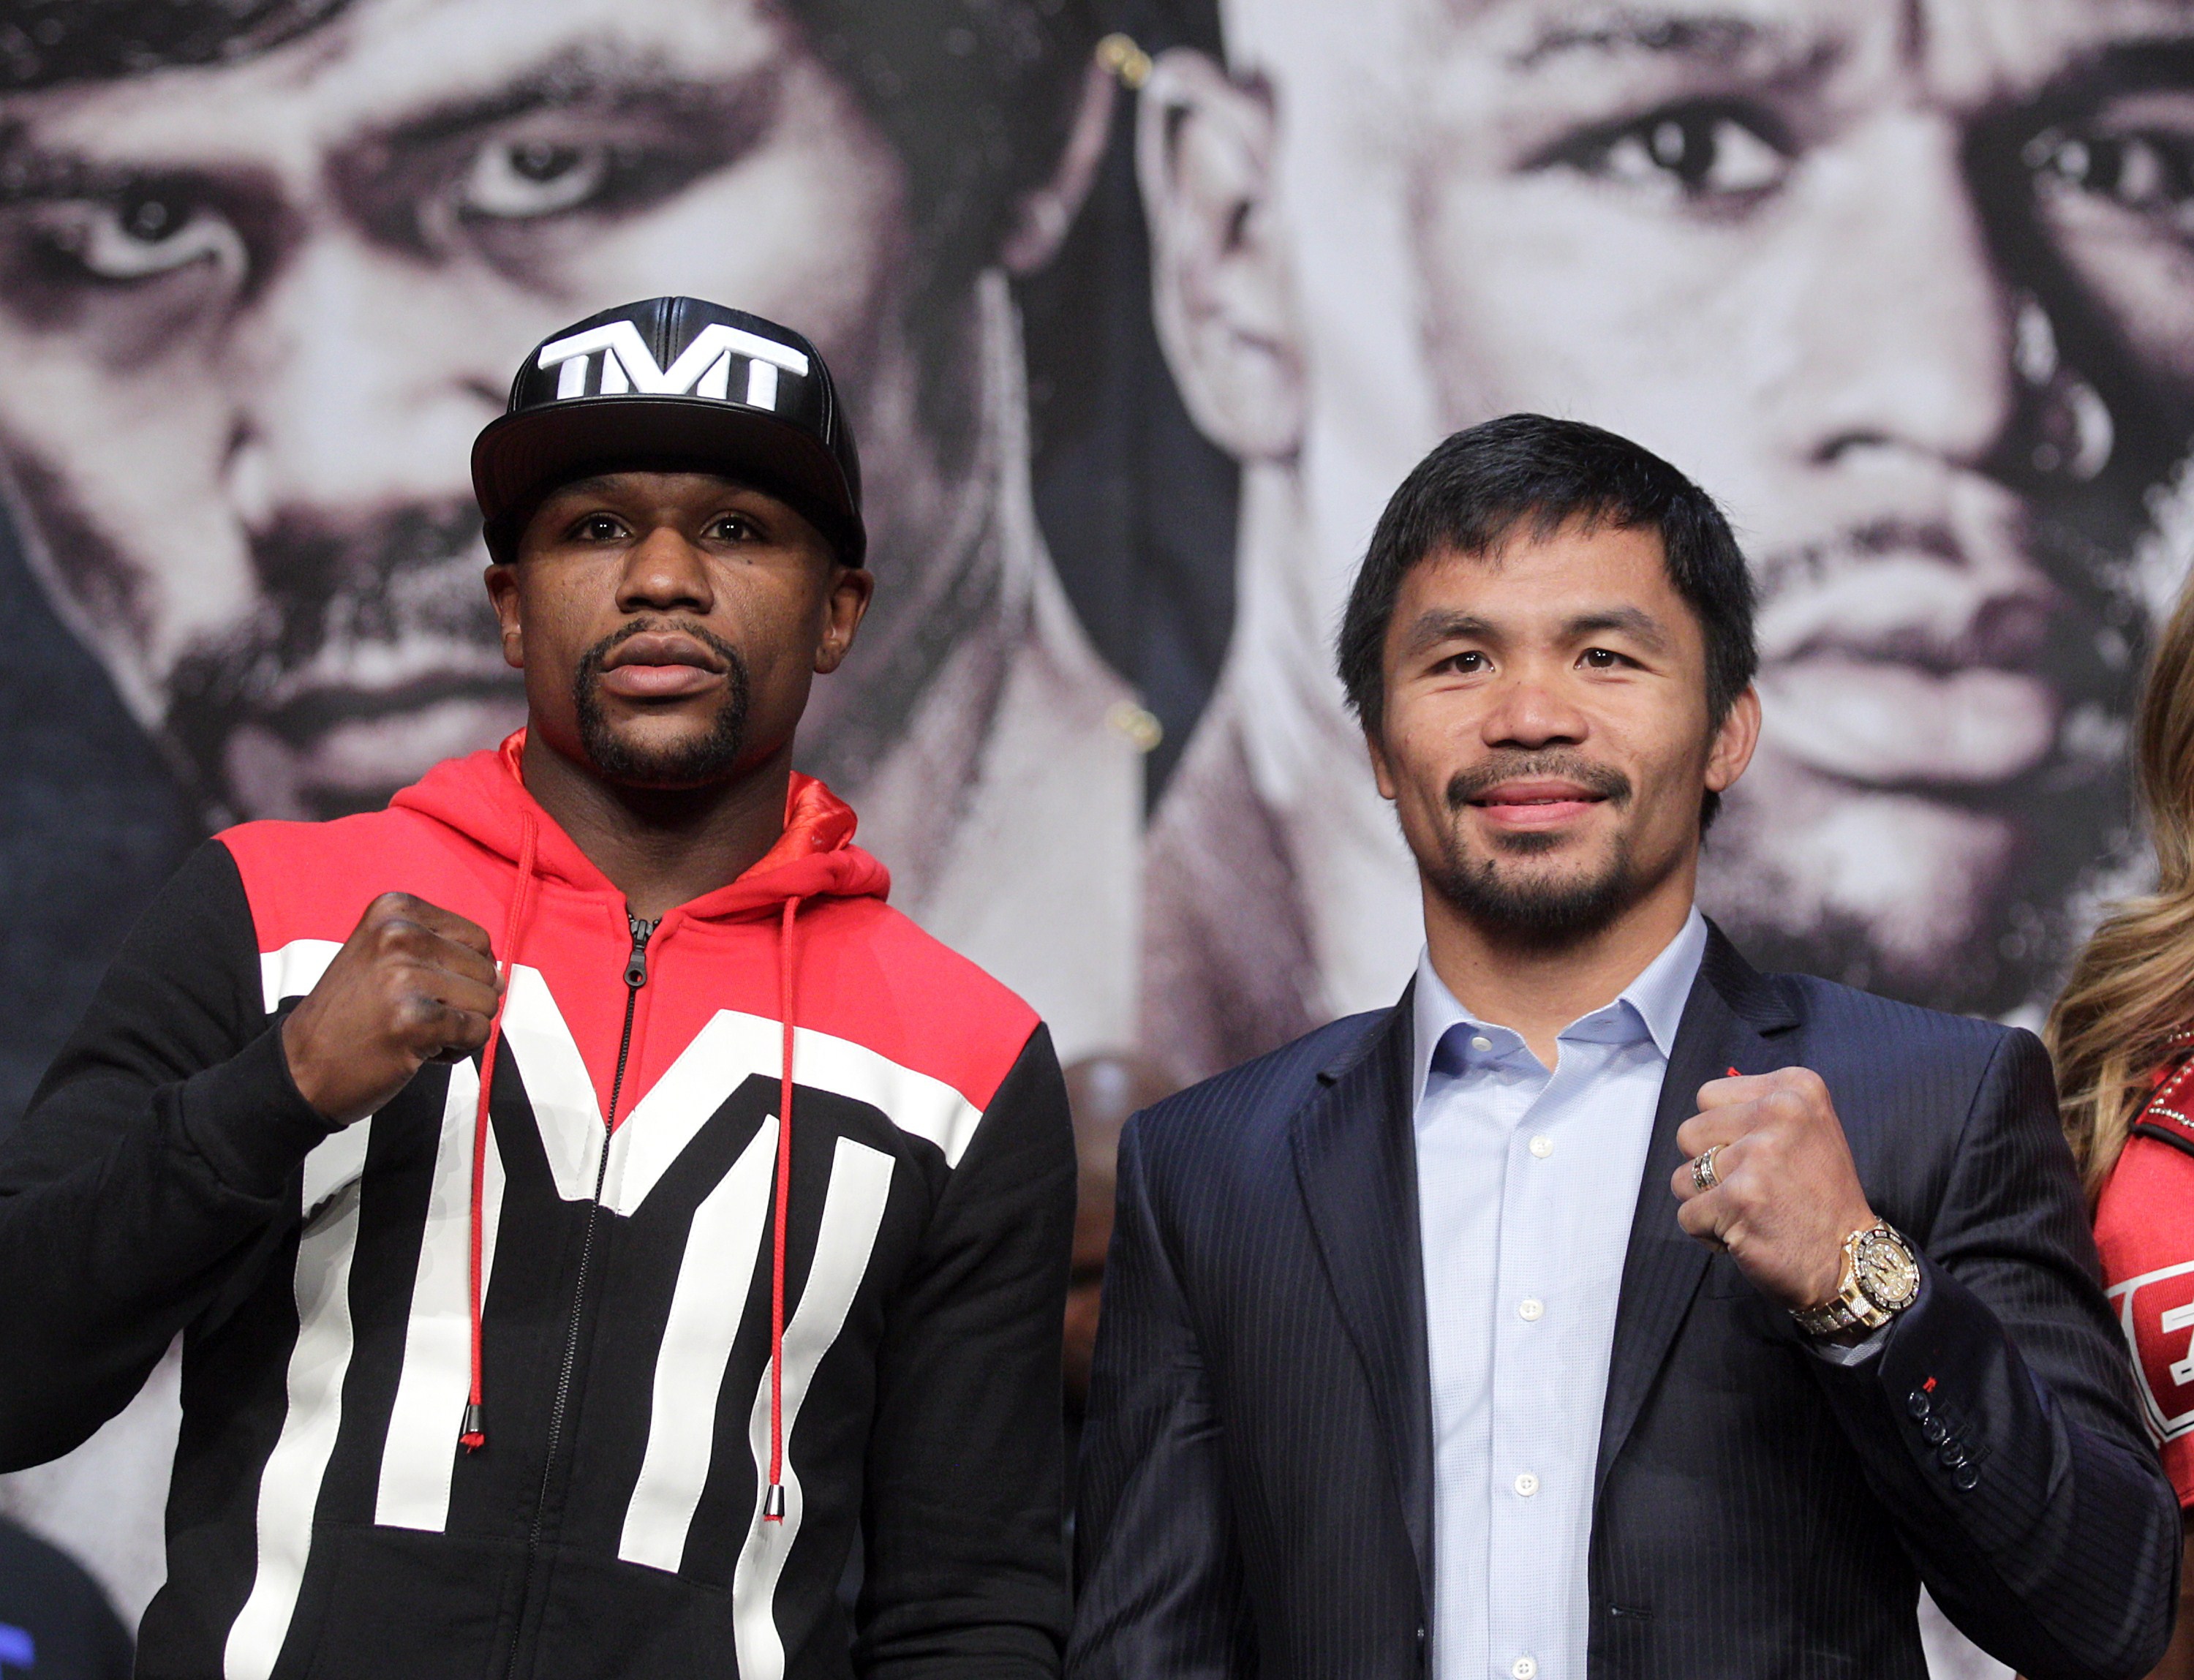 Enjoy it now, guys: Mayweather (left) and Pacquiao are heading for a pounding (JOHN GURZINSKI; AFP/Getty Images)